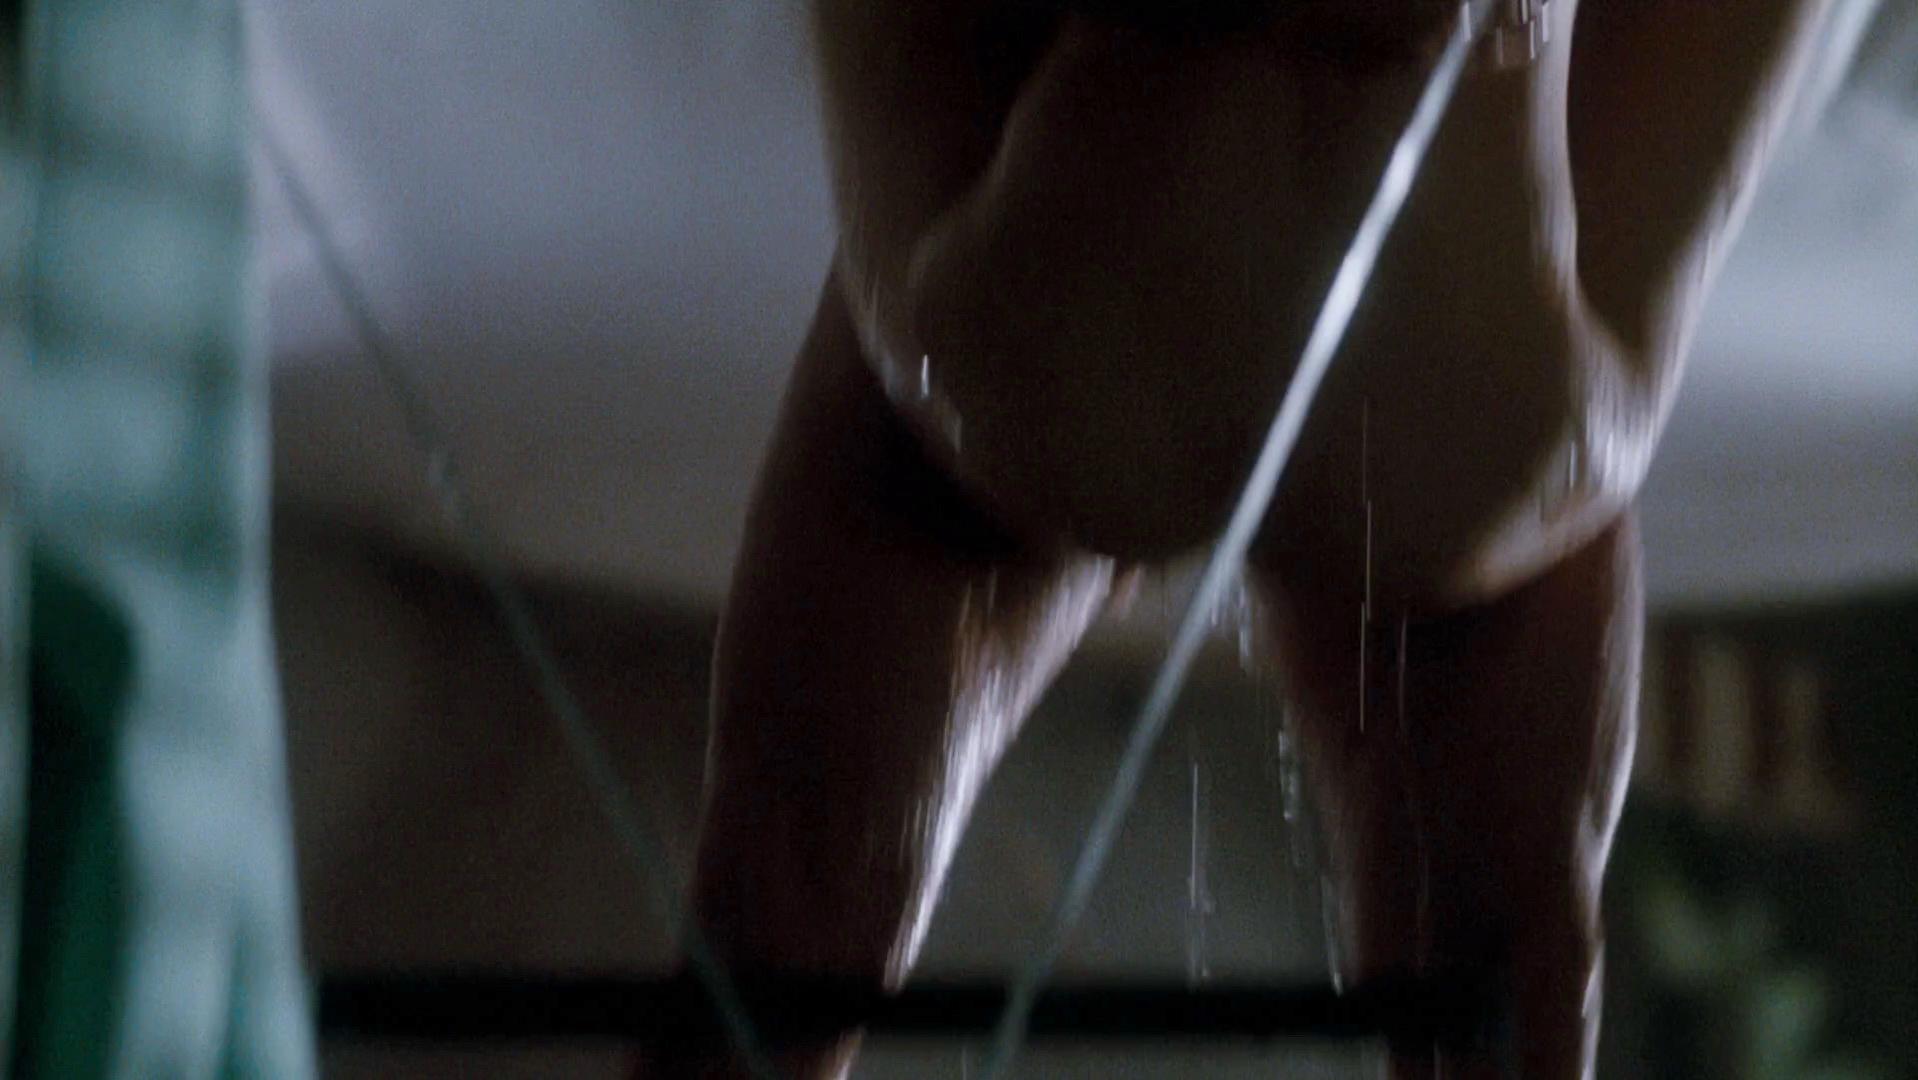 Michelle pfeiffer nude pictures